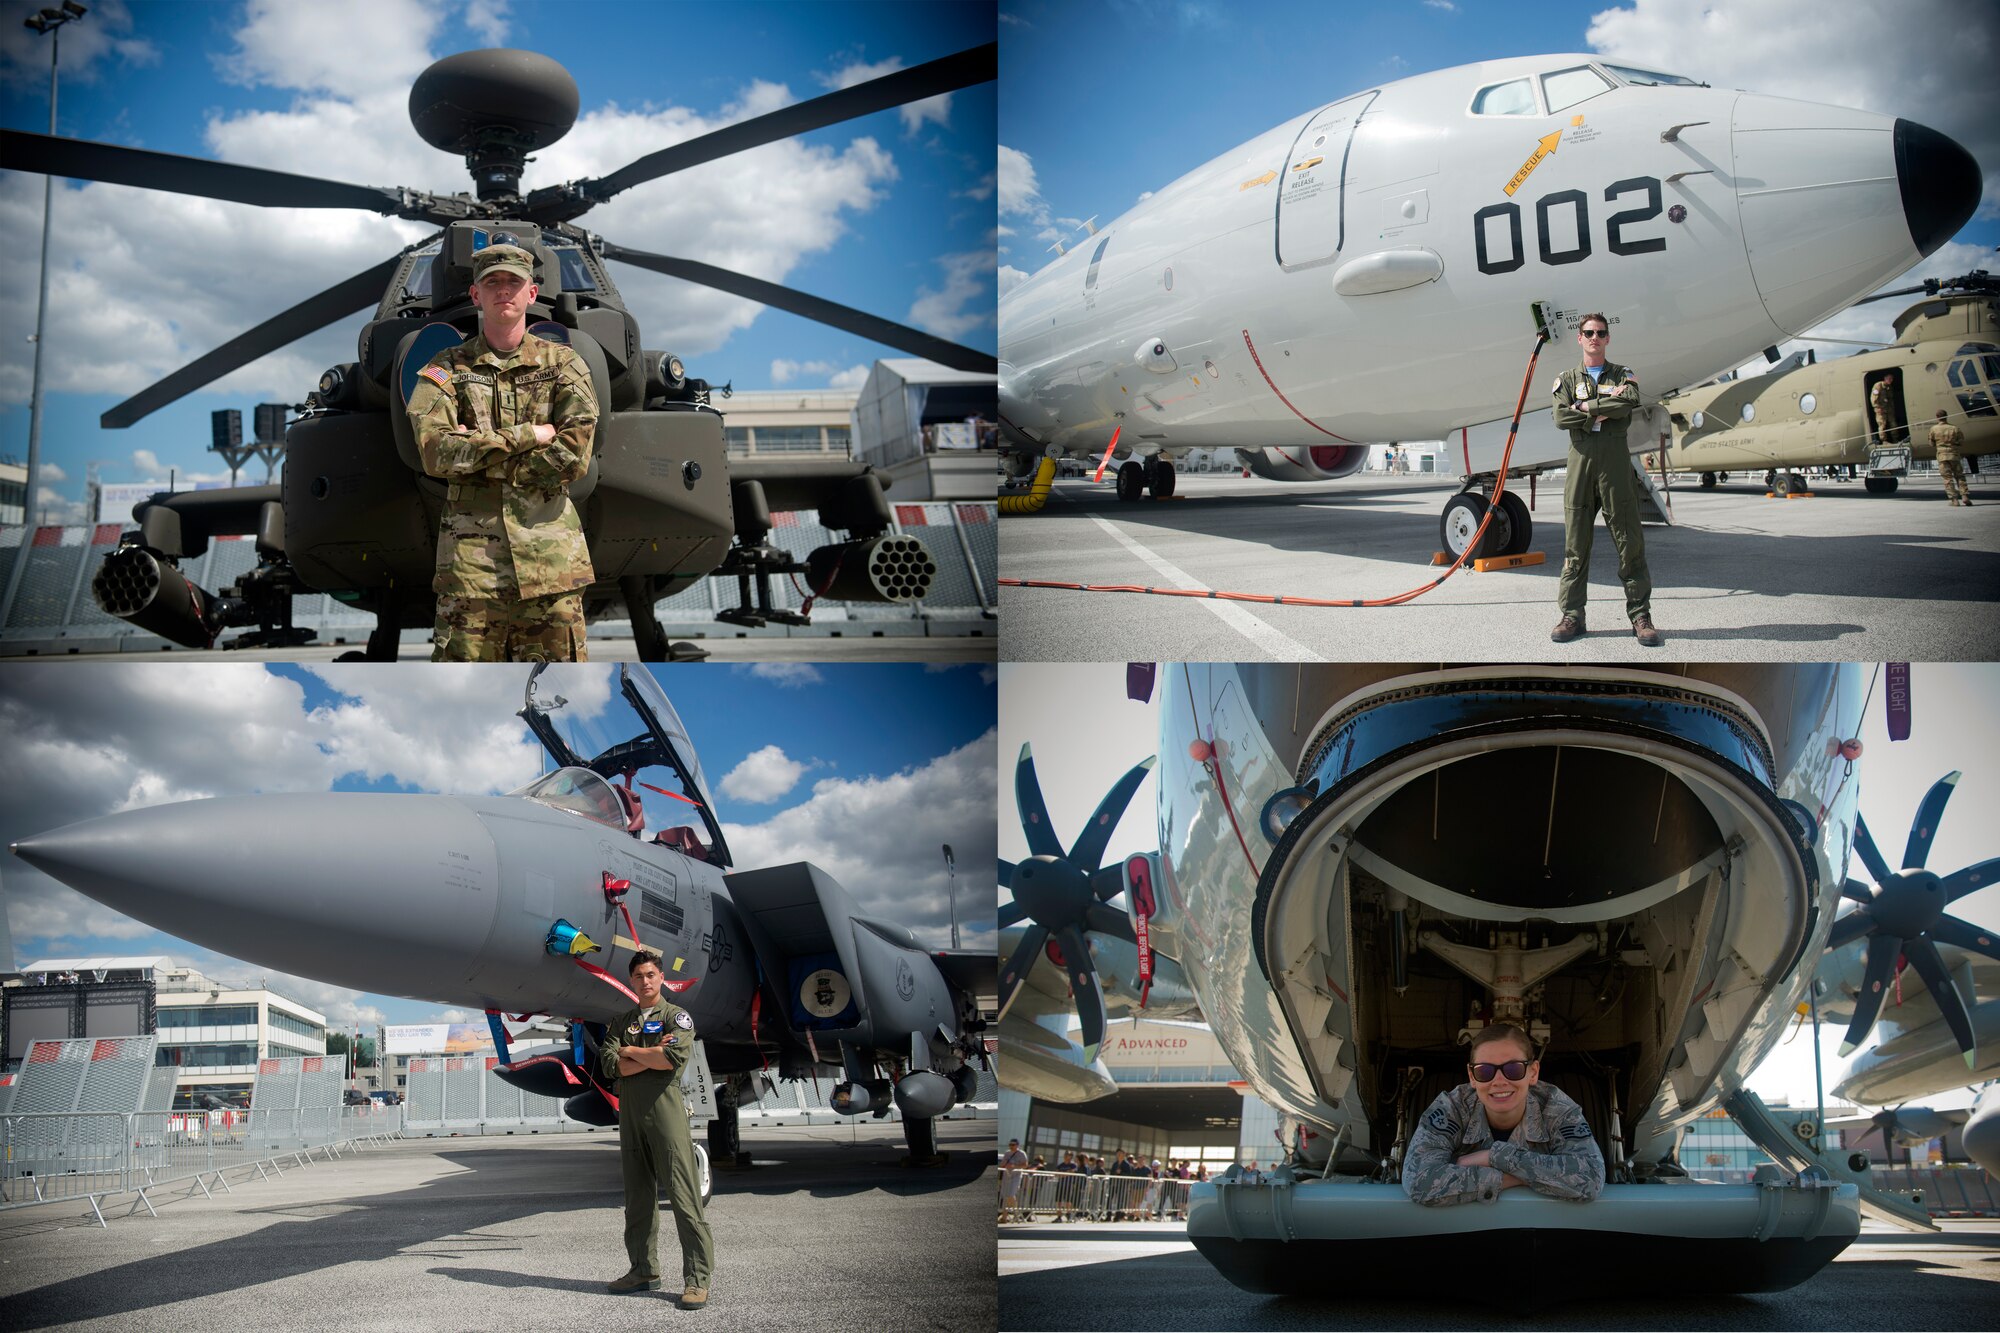 U.S. service members from the U.S. Navy, U.S. Army, U.S. Air Force, and U.S. Air National Guard pose with aircraft from their respective units at the Paris Air Show, which was held June 17-23, 2019. Clockwise, from top left, U.S. Army 1st Lt. Ryan Johnson, Bravo Troop, 1st Squadron, 6th Cavalry Regiment, 1st Combat Aviation Brigade, 1st Infantry Division, stationed at Fort Riley, Kan., U.S. Navy Lt. Adam Anderson, a mission commander from Patrol Squadron 9, Combat Aircrew 3, Naval Air Station Whidbey Island, Wash., U.S. Air National Guard Staff Sgt. Jennatte Berger, an avionics technician from the 109th Airlift Wing at Stratton Air National Guard Base in Scotia, N.Y., and U.S. Air Force 1st Lt. Brandon "Animal" Shelley, a 492nd Fighter Squadron weapon systems officer from the 48th Fighter Wing at Royal Air Force Lakenheath, England, were each participating in an international air show for the first time. (U.S. Air Force photos by Master Sgt. Eric Burks)